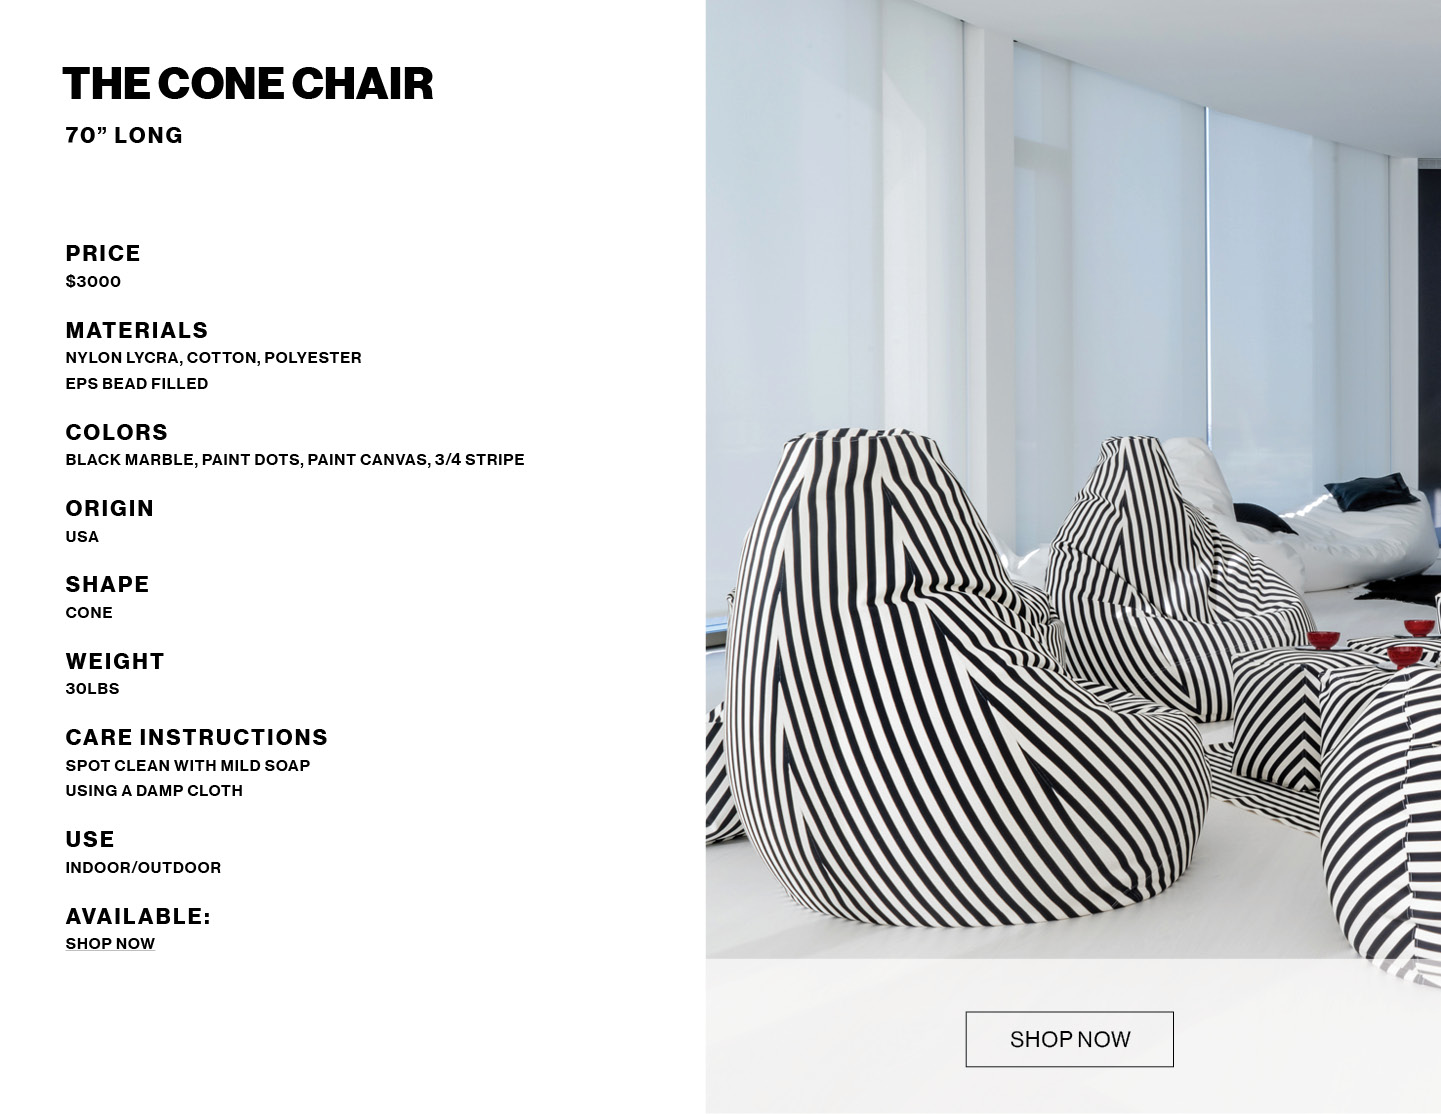 The Cone Chair product info